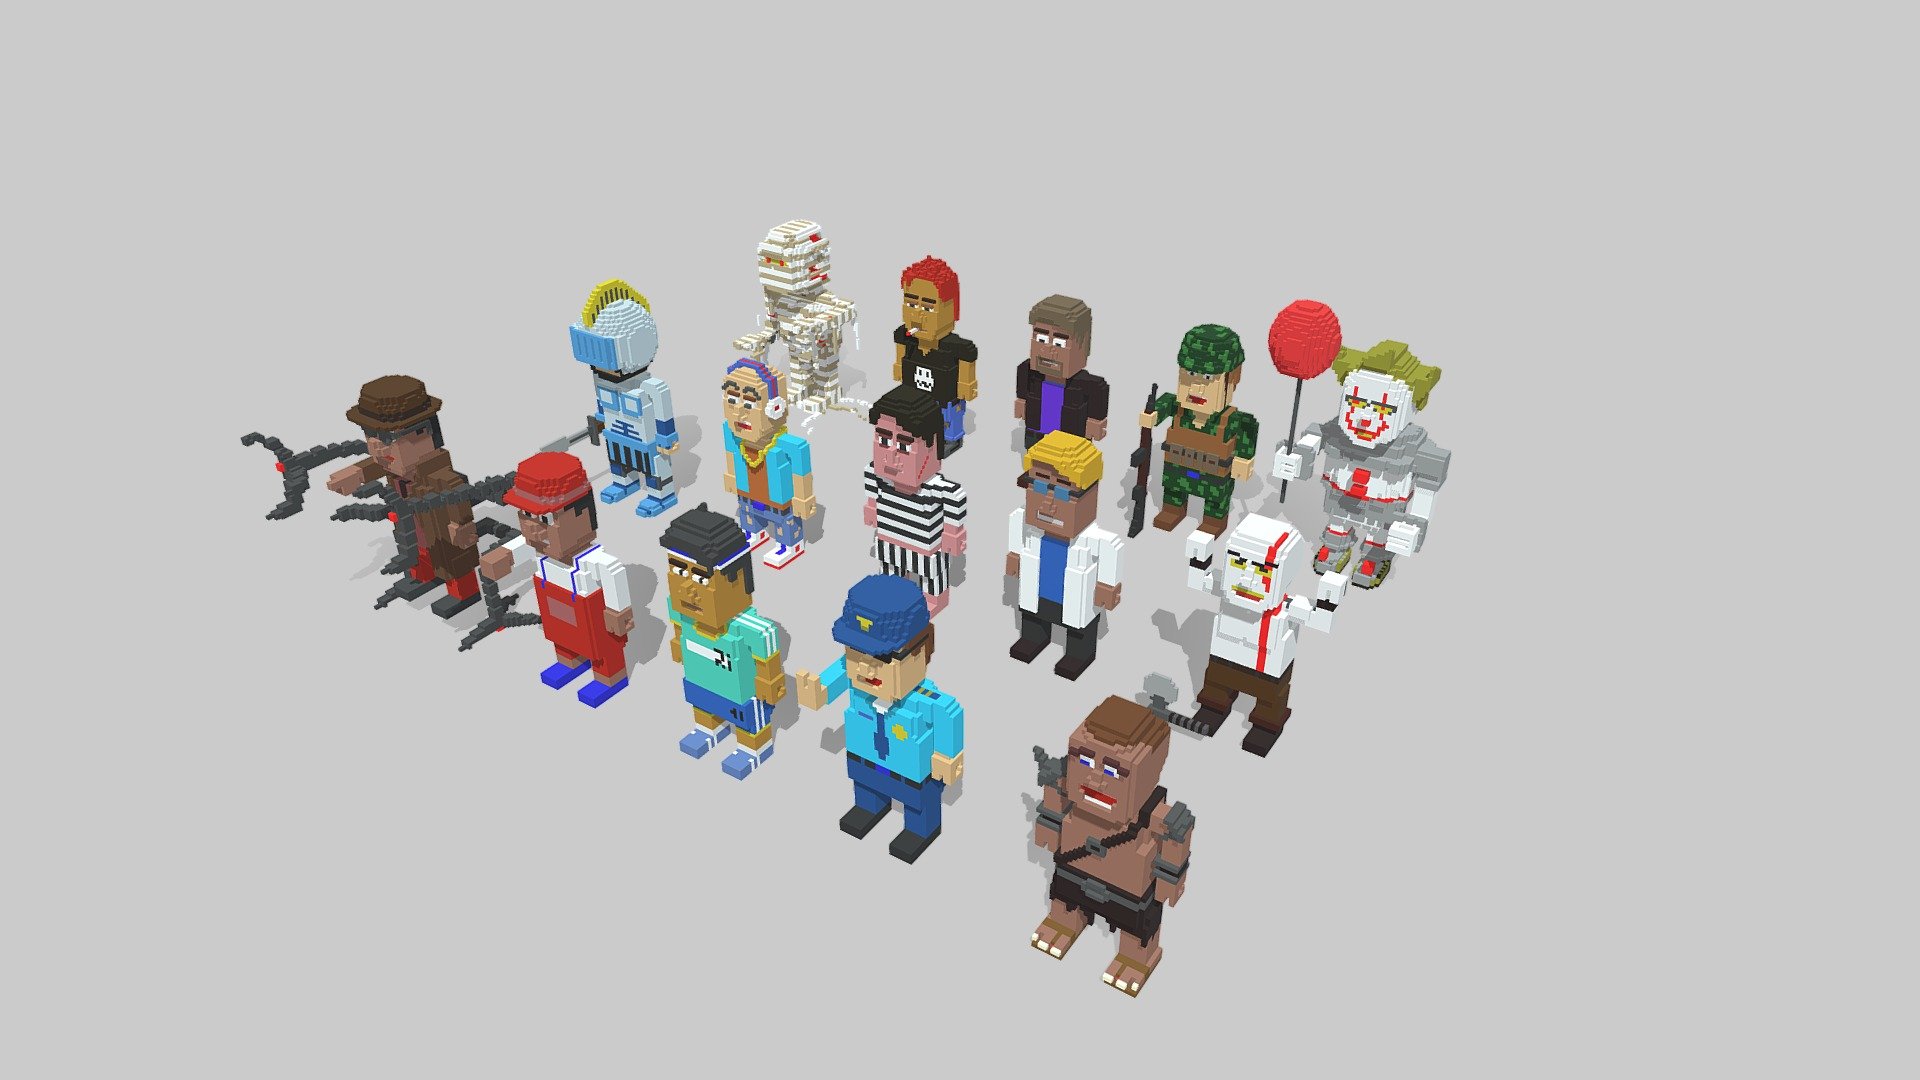 Little unique character voxel art useful for your avatar or profile 3d model